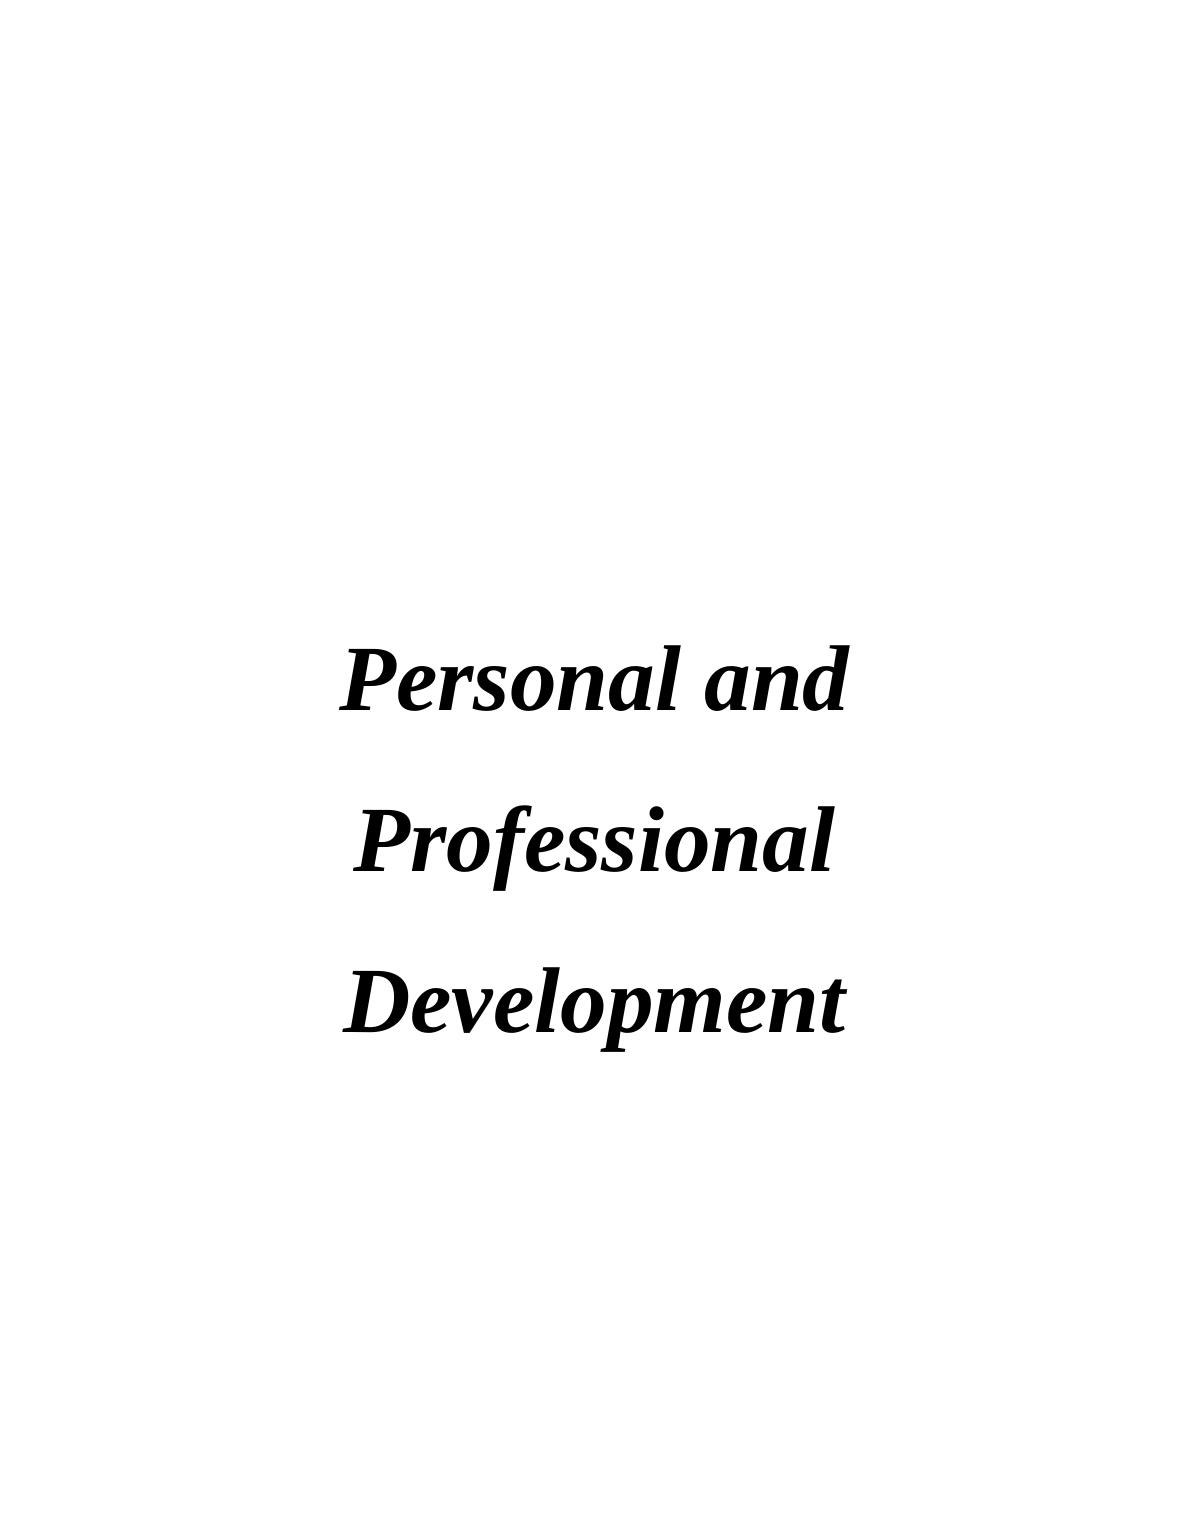 Personal and Professional Development_1